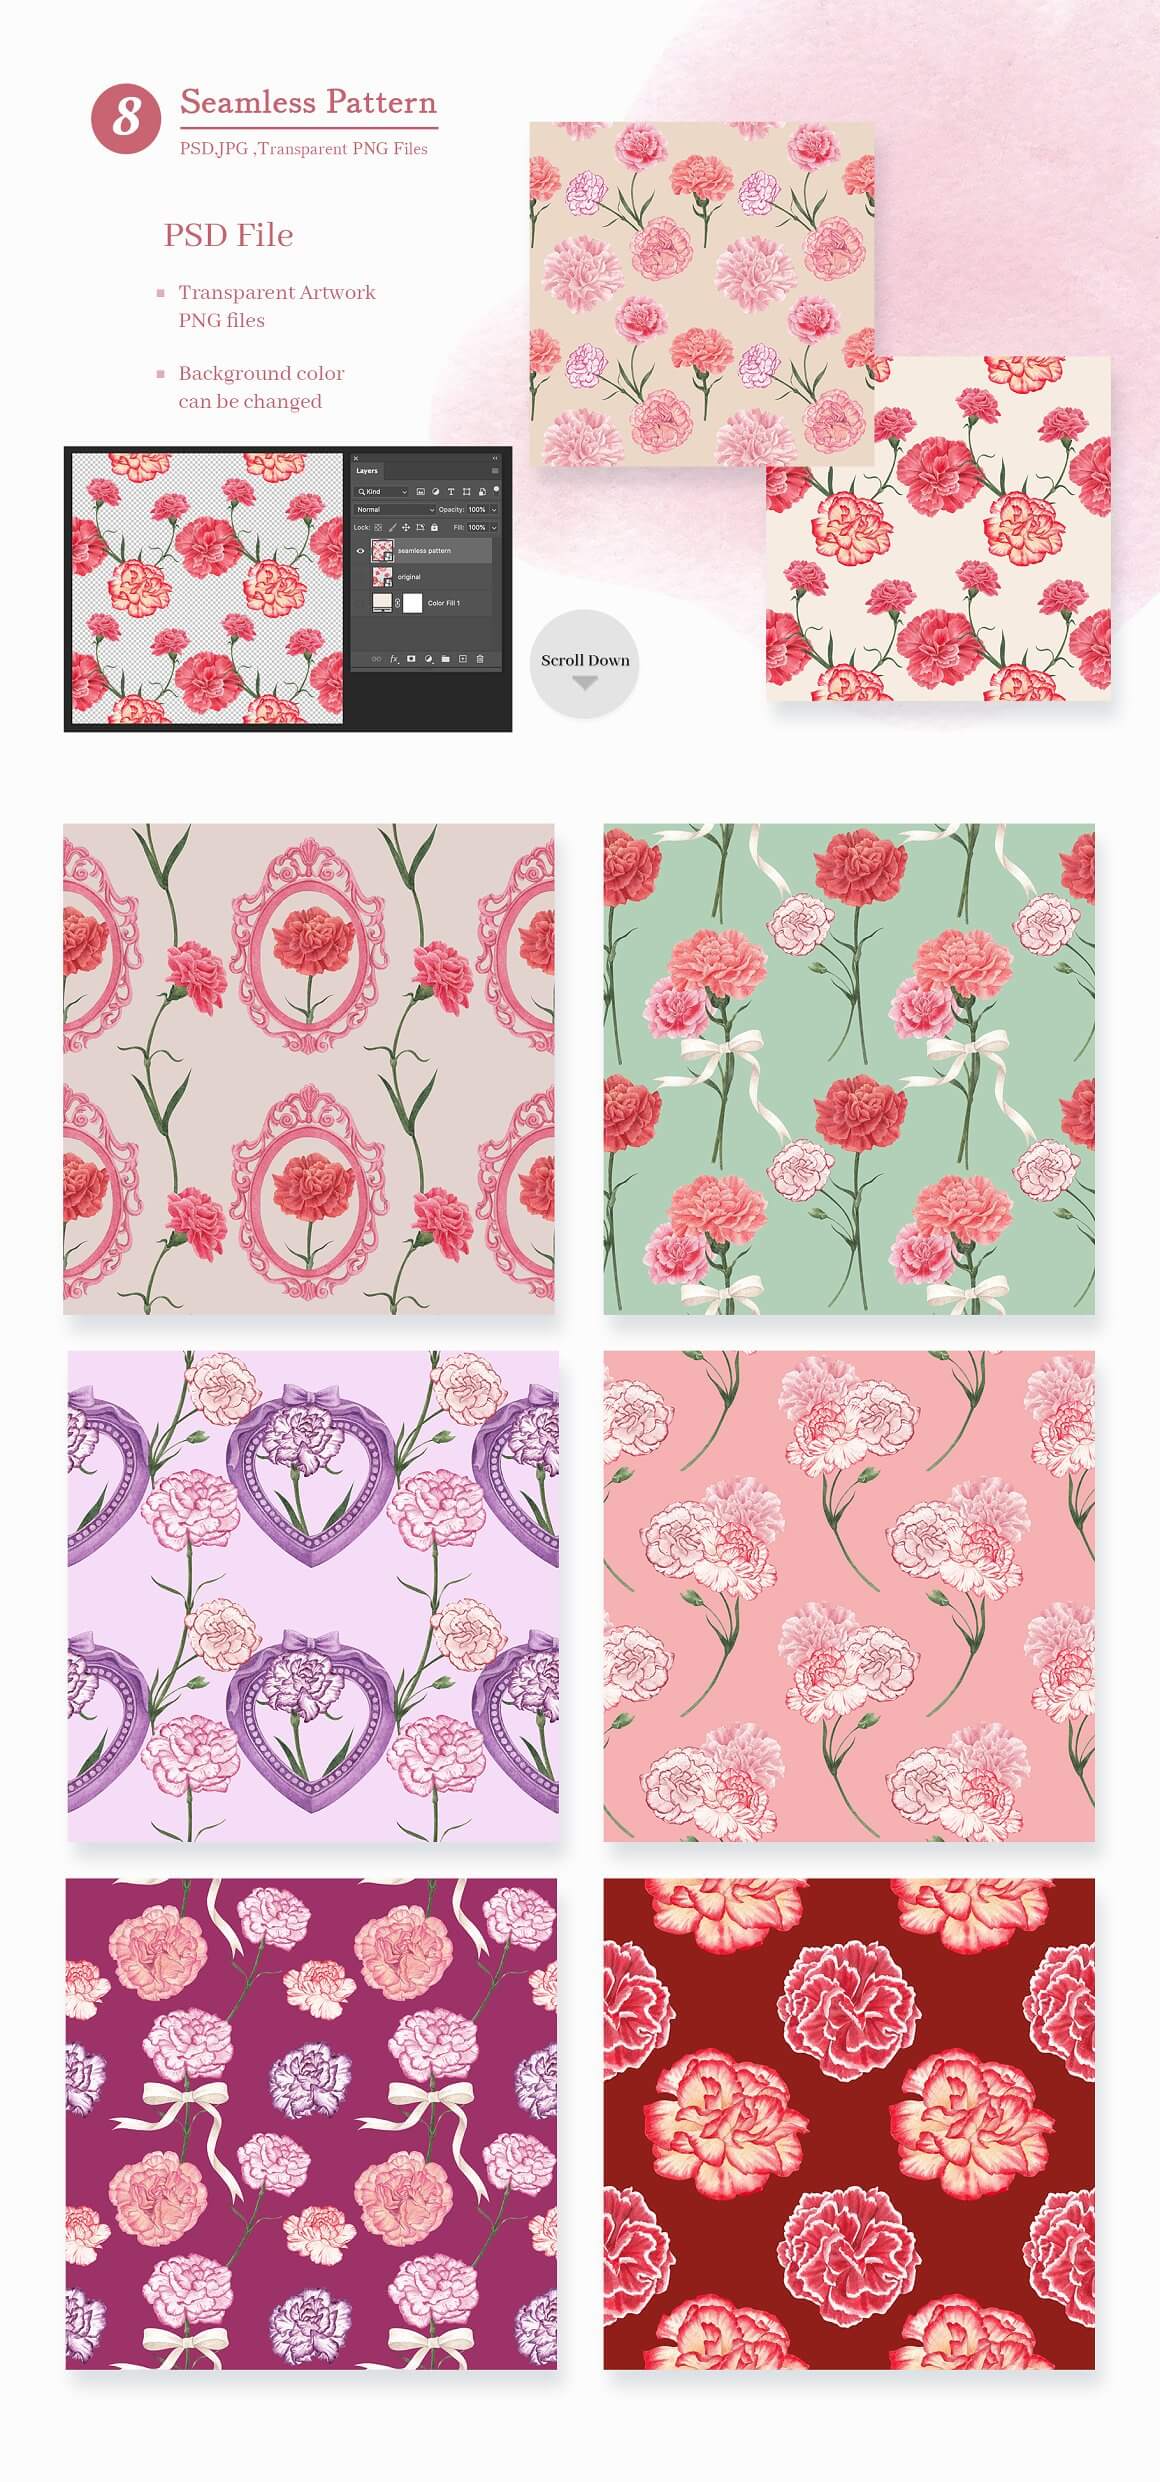 Seamless pattern with different types of carnations in different colors and designs.